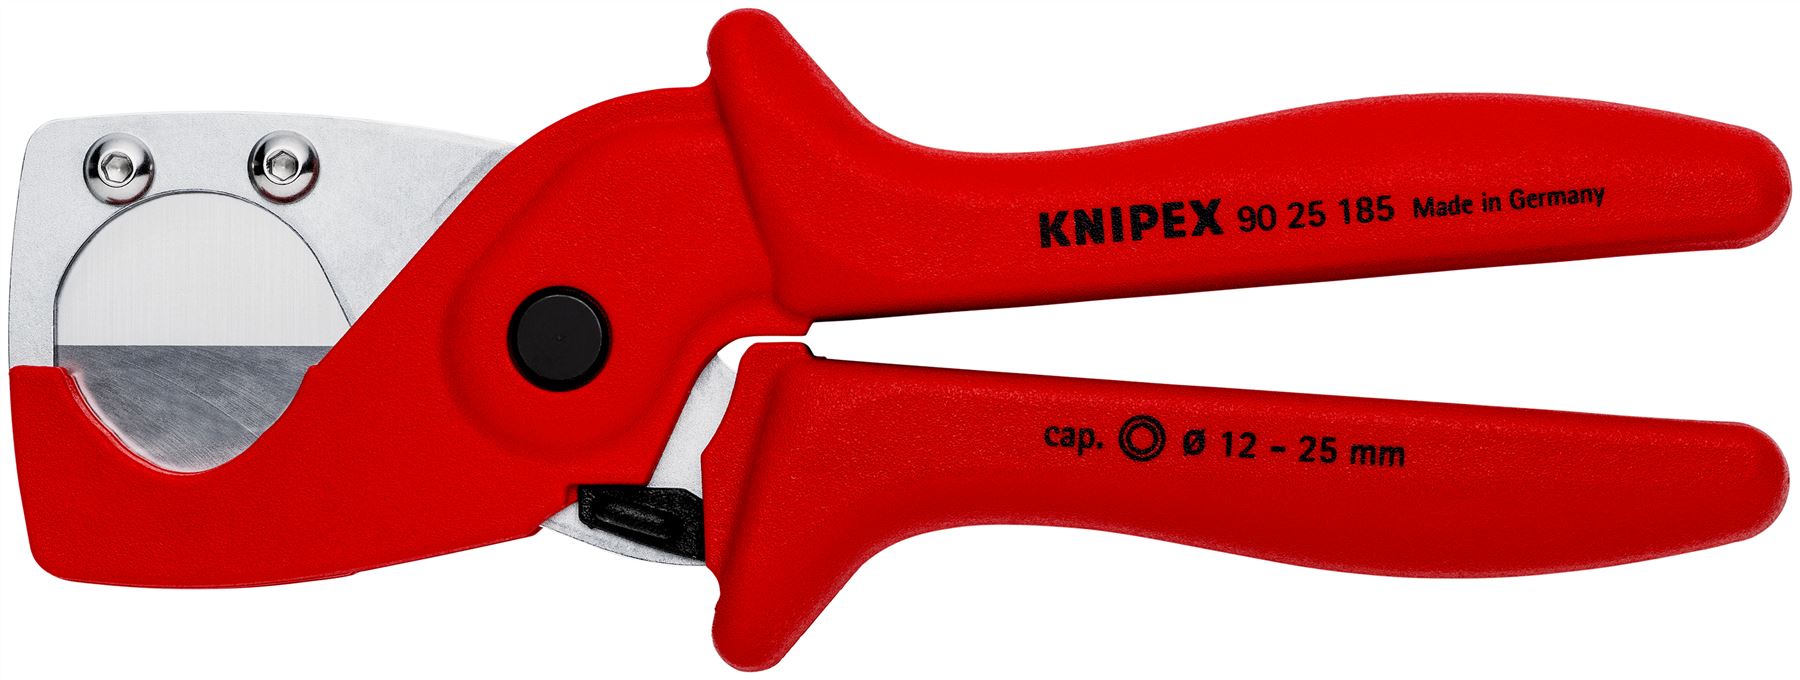 Knipex Plastic Pipe Cutters for Composite Pipes 185mm 90 25 185